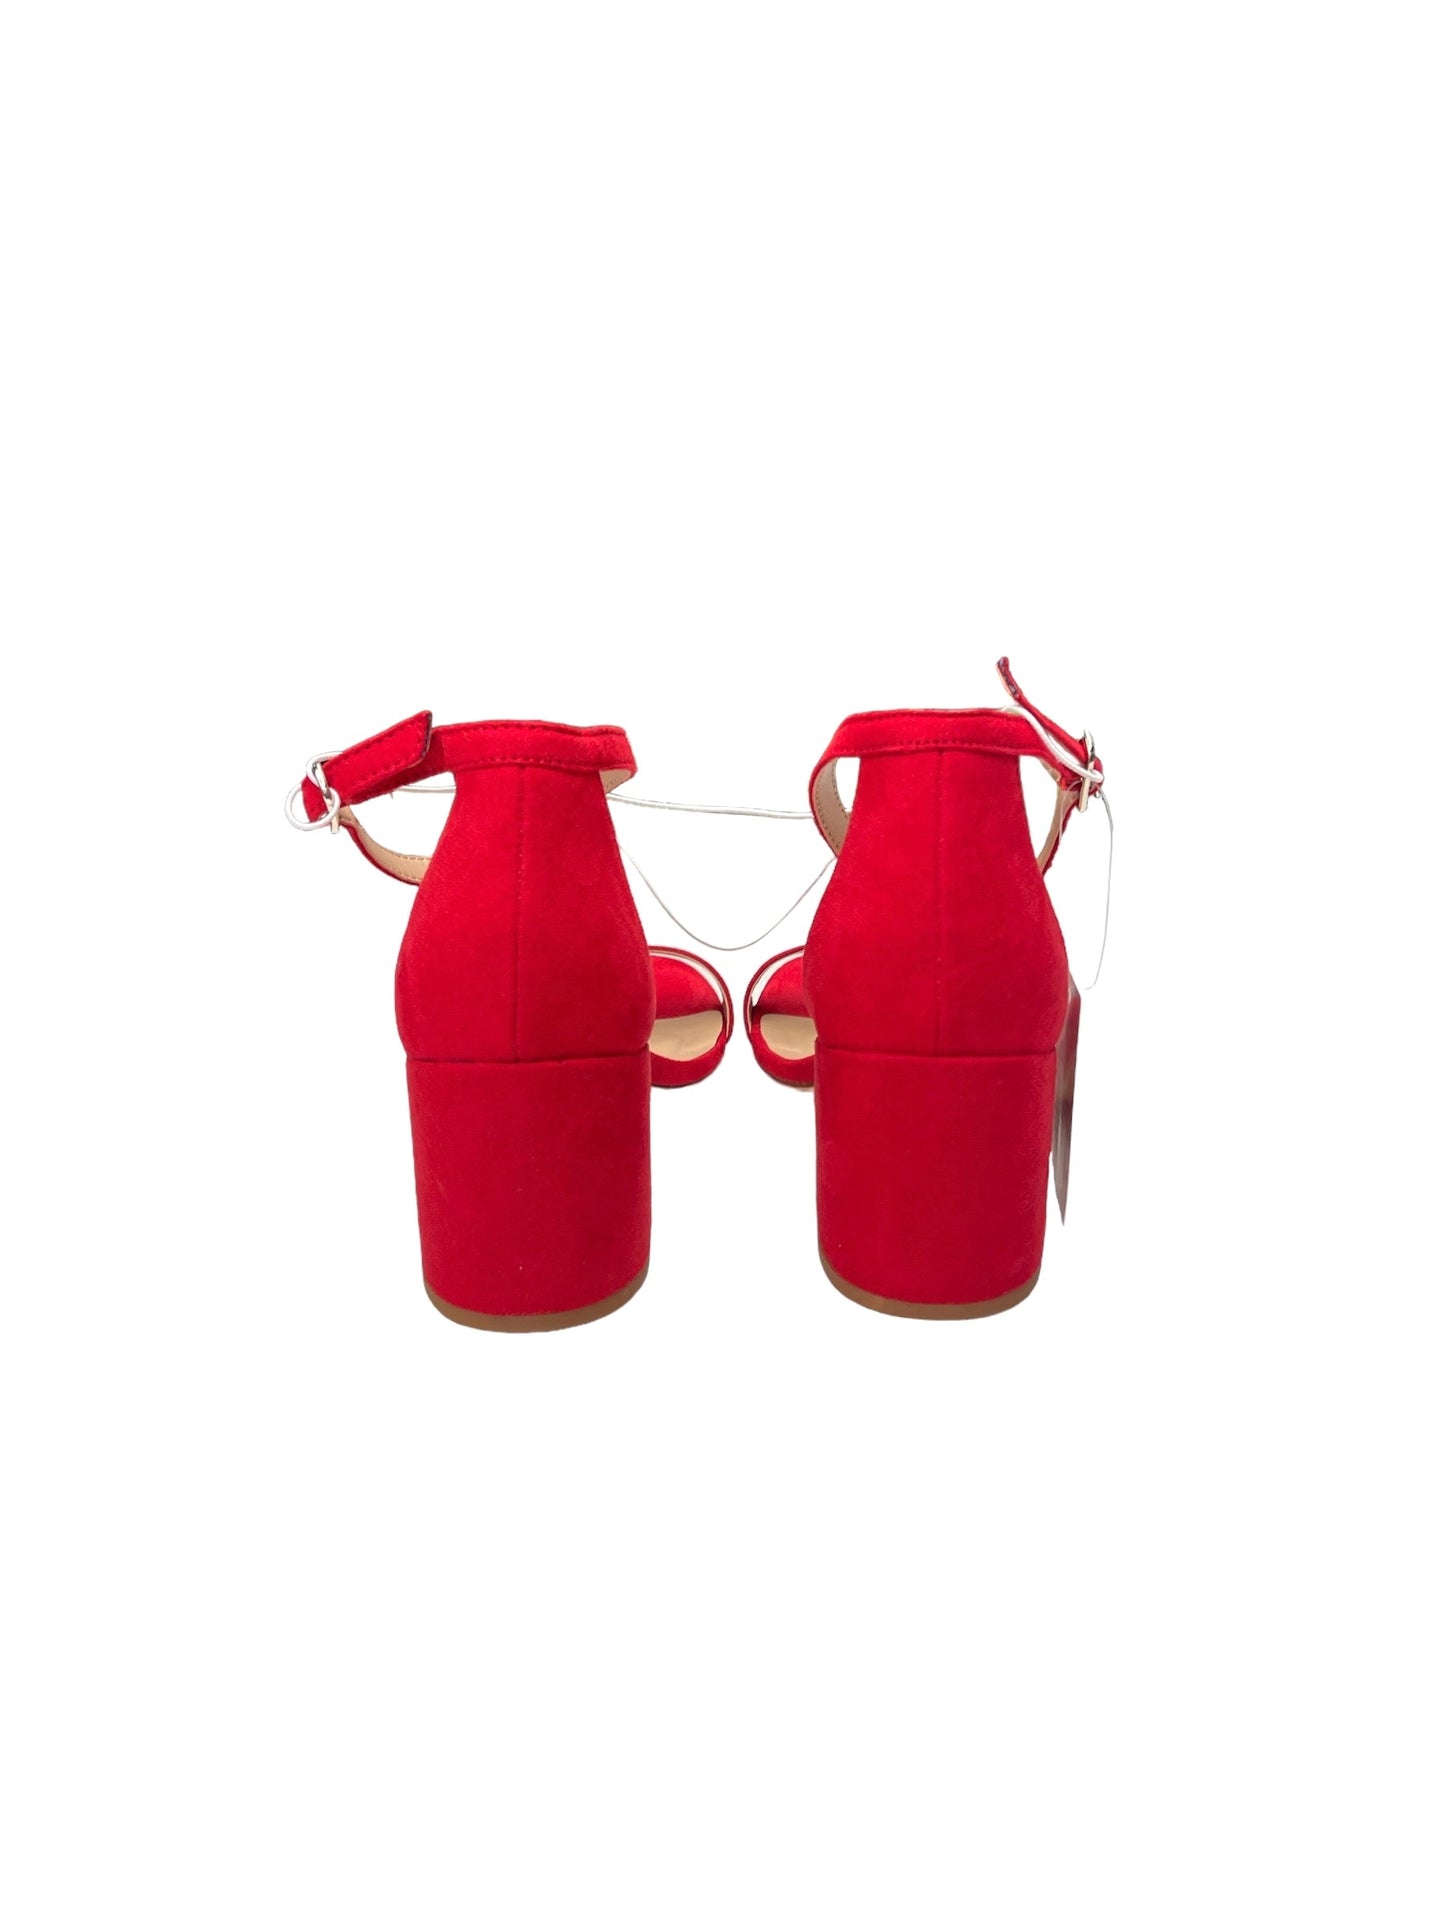 Red Shoes Heels Block A New Day, Size 8